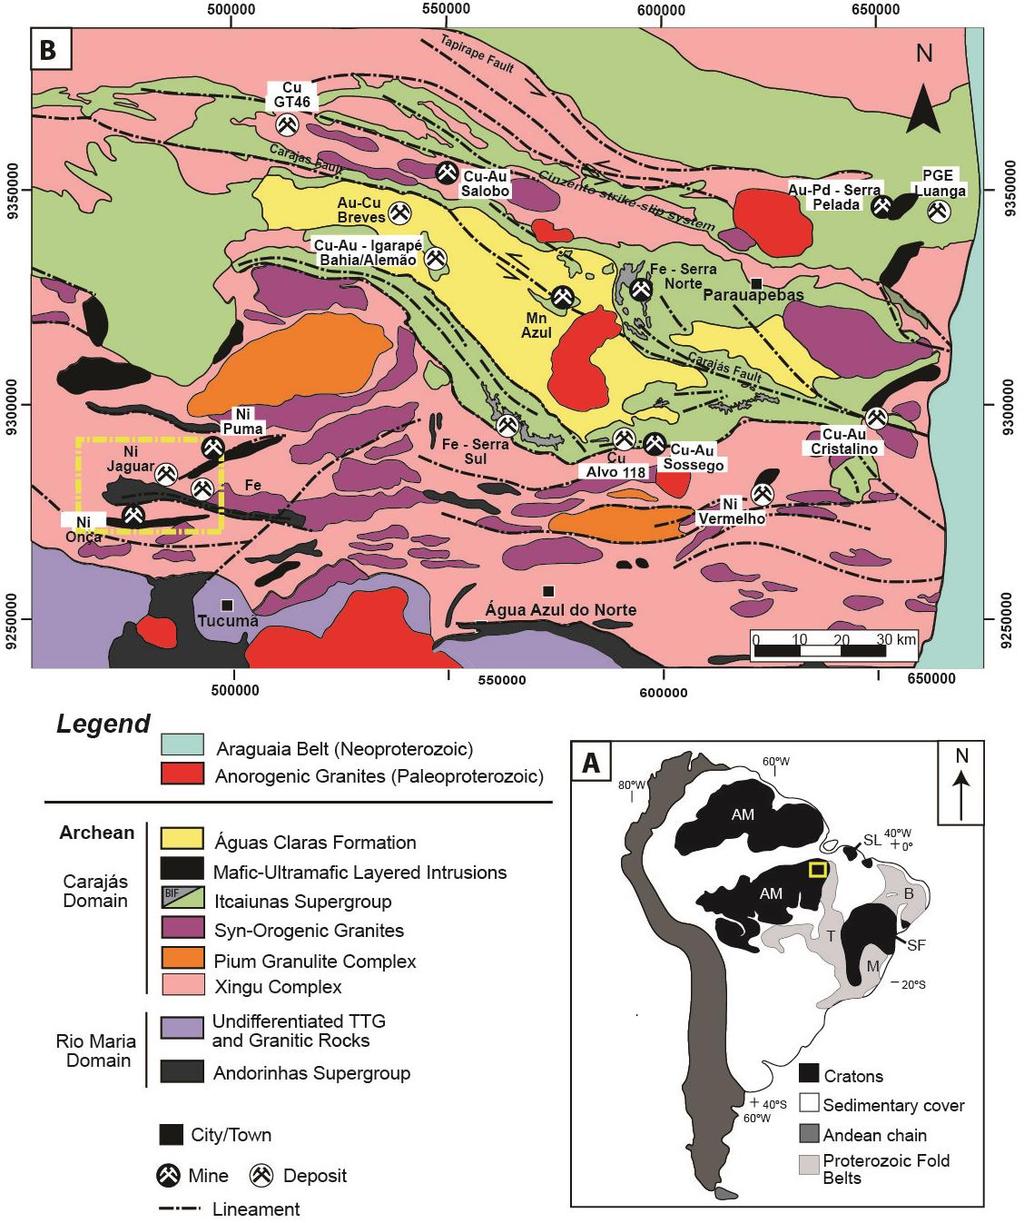 Fig. 1. A) Location of the Carajás Mineral Province. AM - Amazonian Craton; B - Borborema Province; M - Mantiqueira Province; SF - São Francisco Craton; T - Tocantins Province.